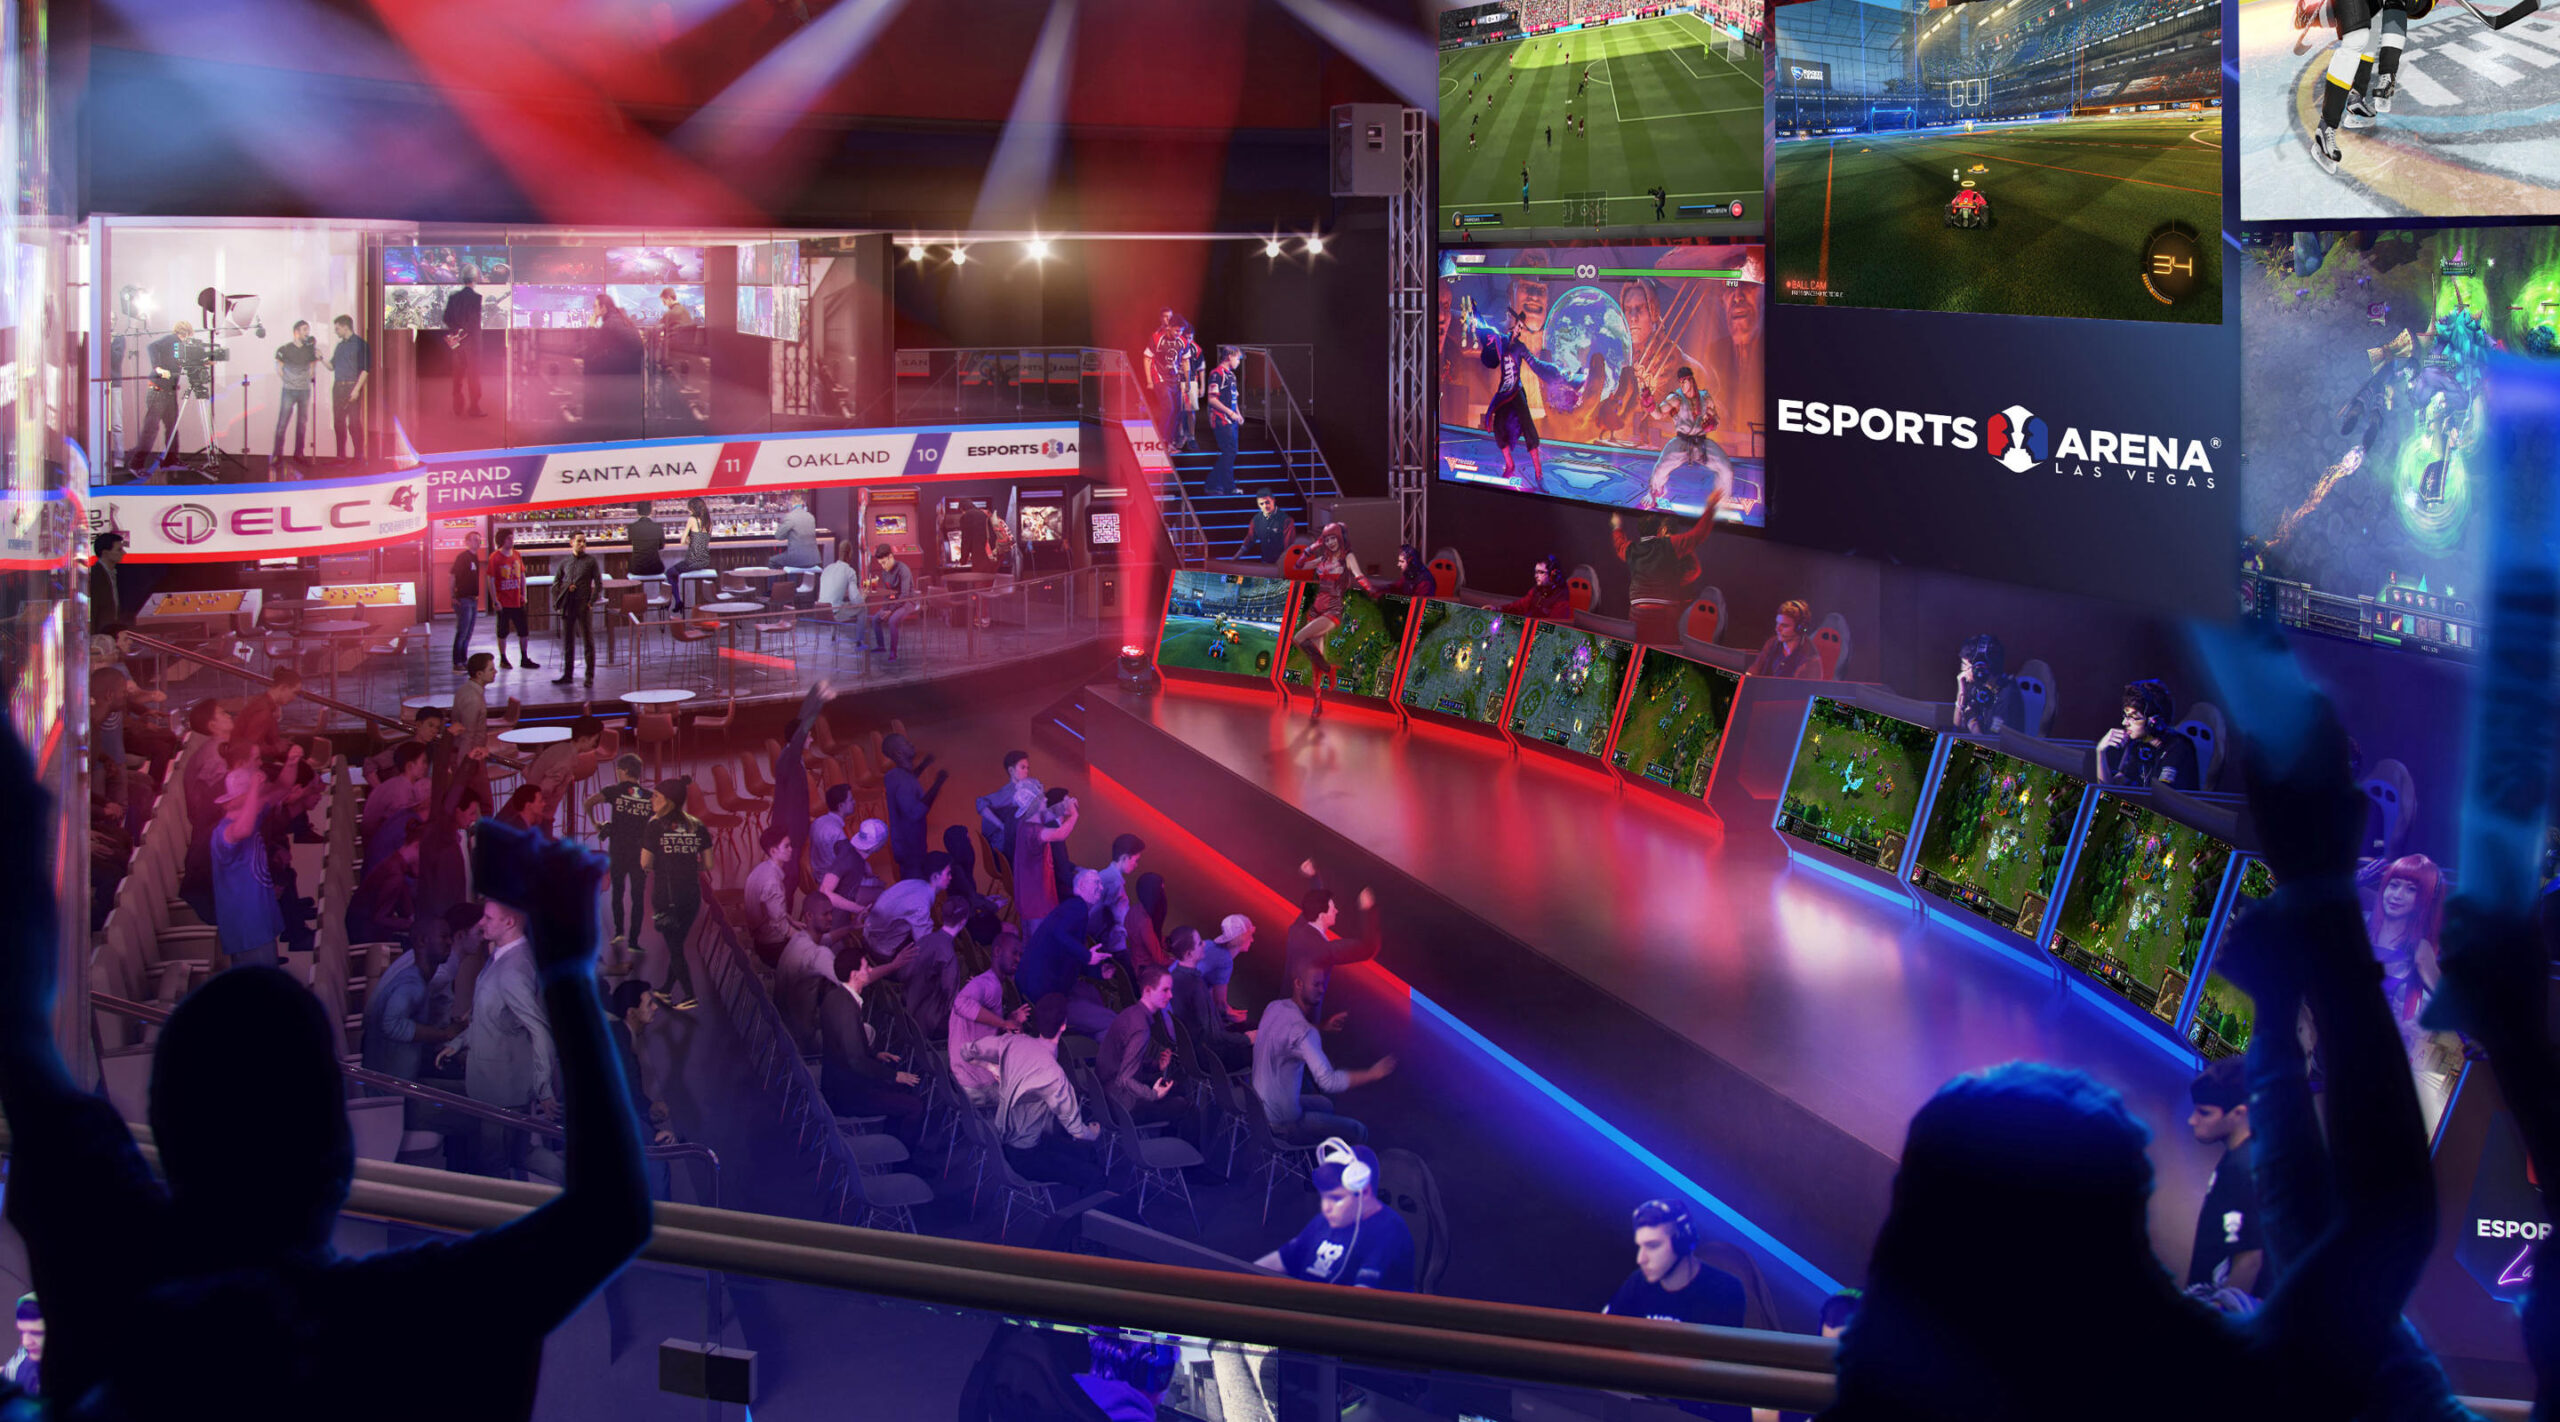 World Poker Tour to Play All Final Tables at Luxor’s New Esports Arena